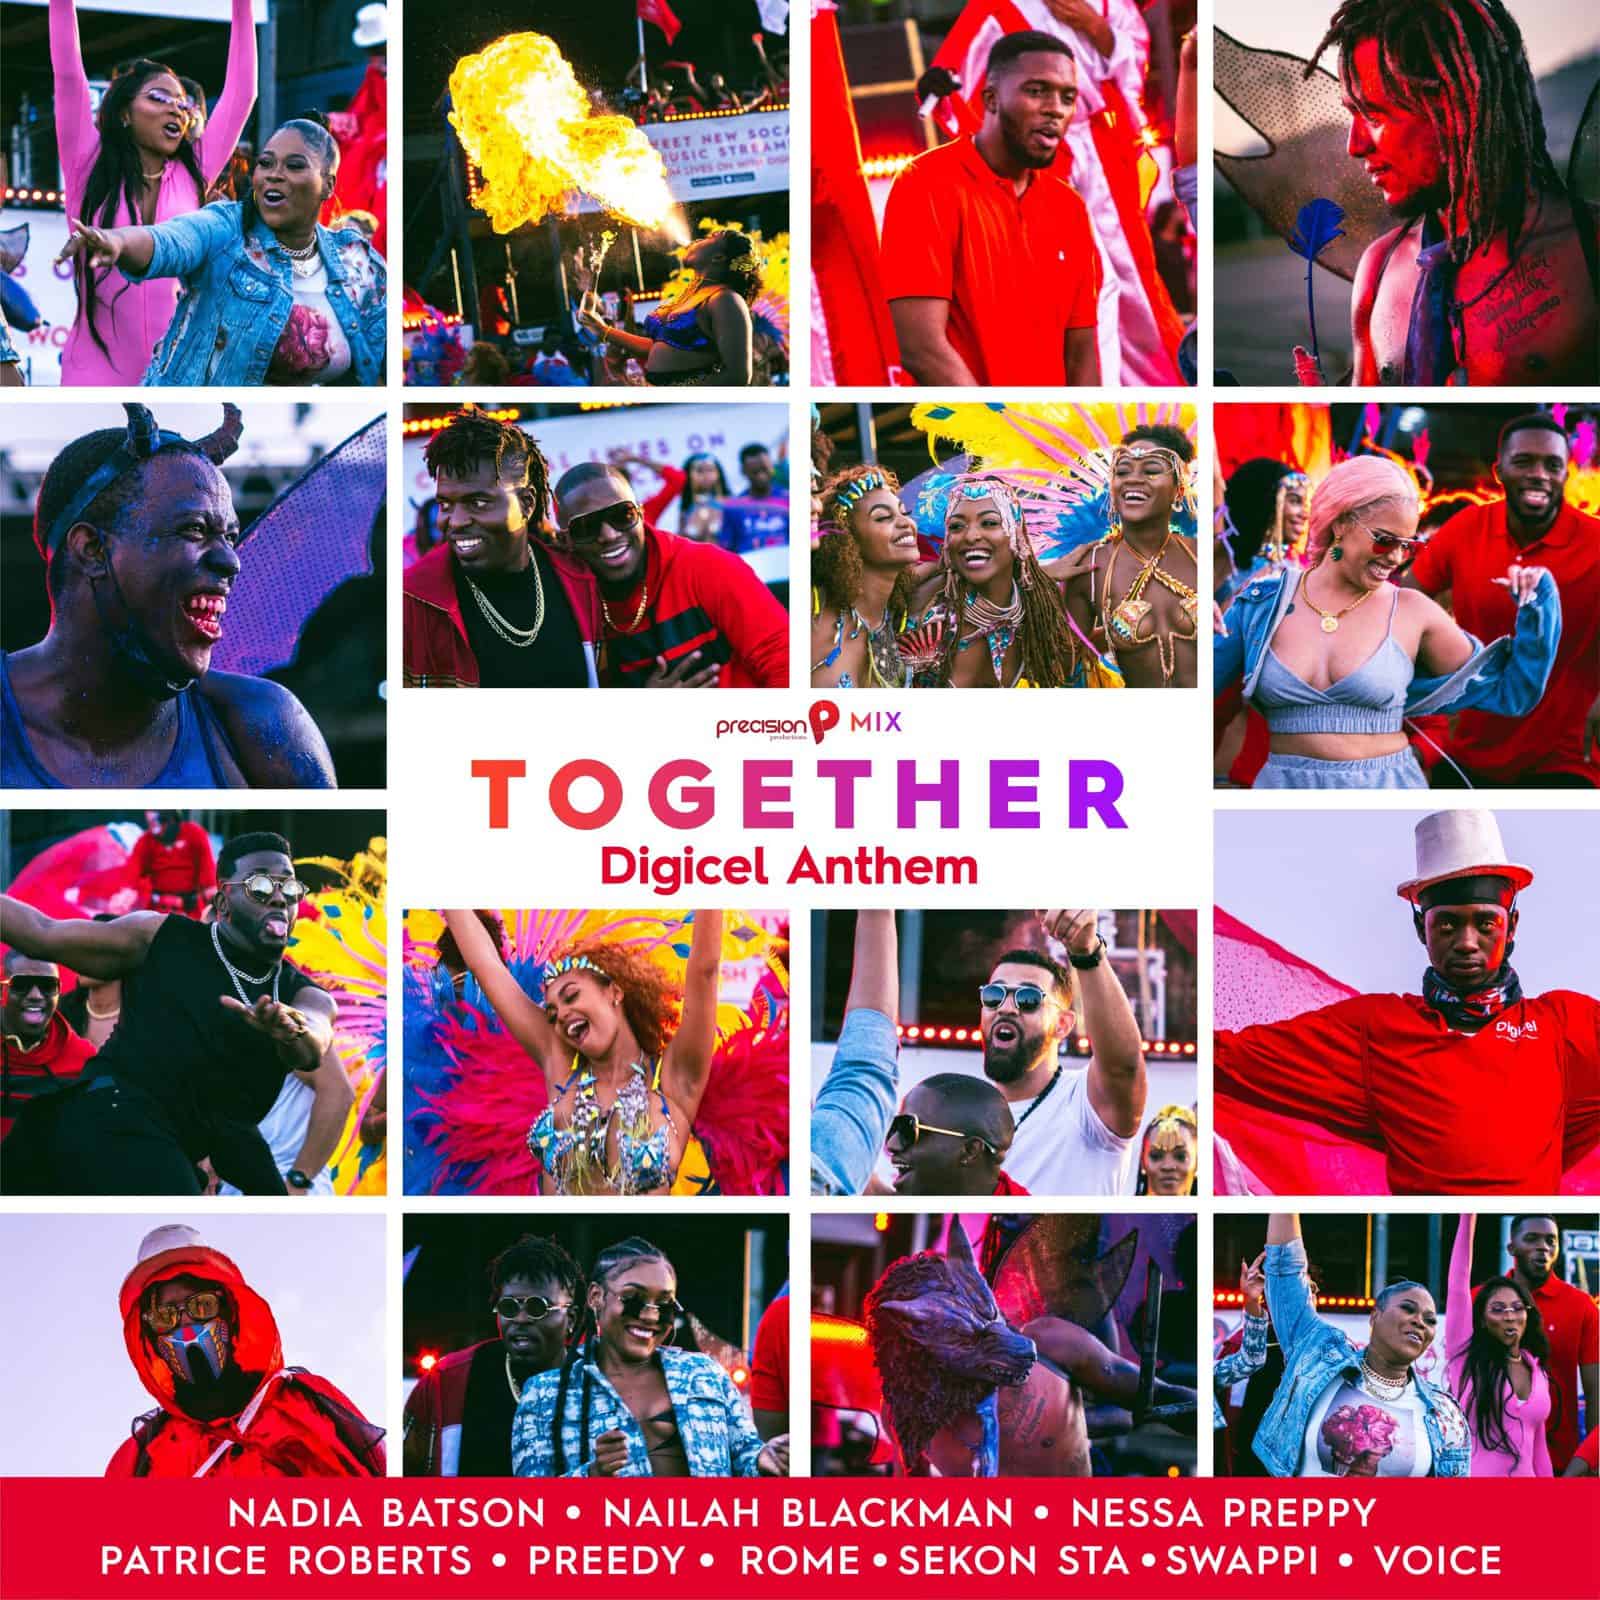 Together (Digicel Anthem) [Precision Productions Mix]